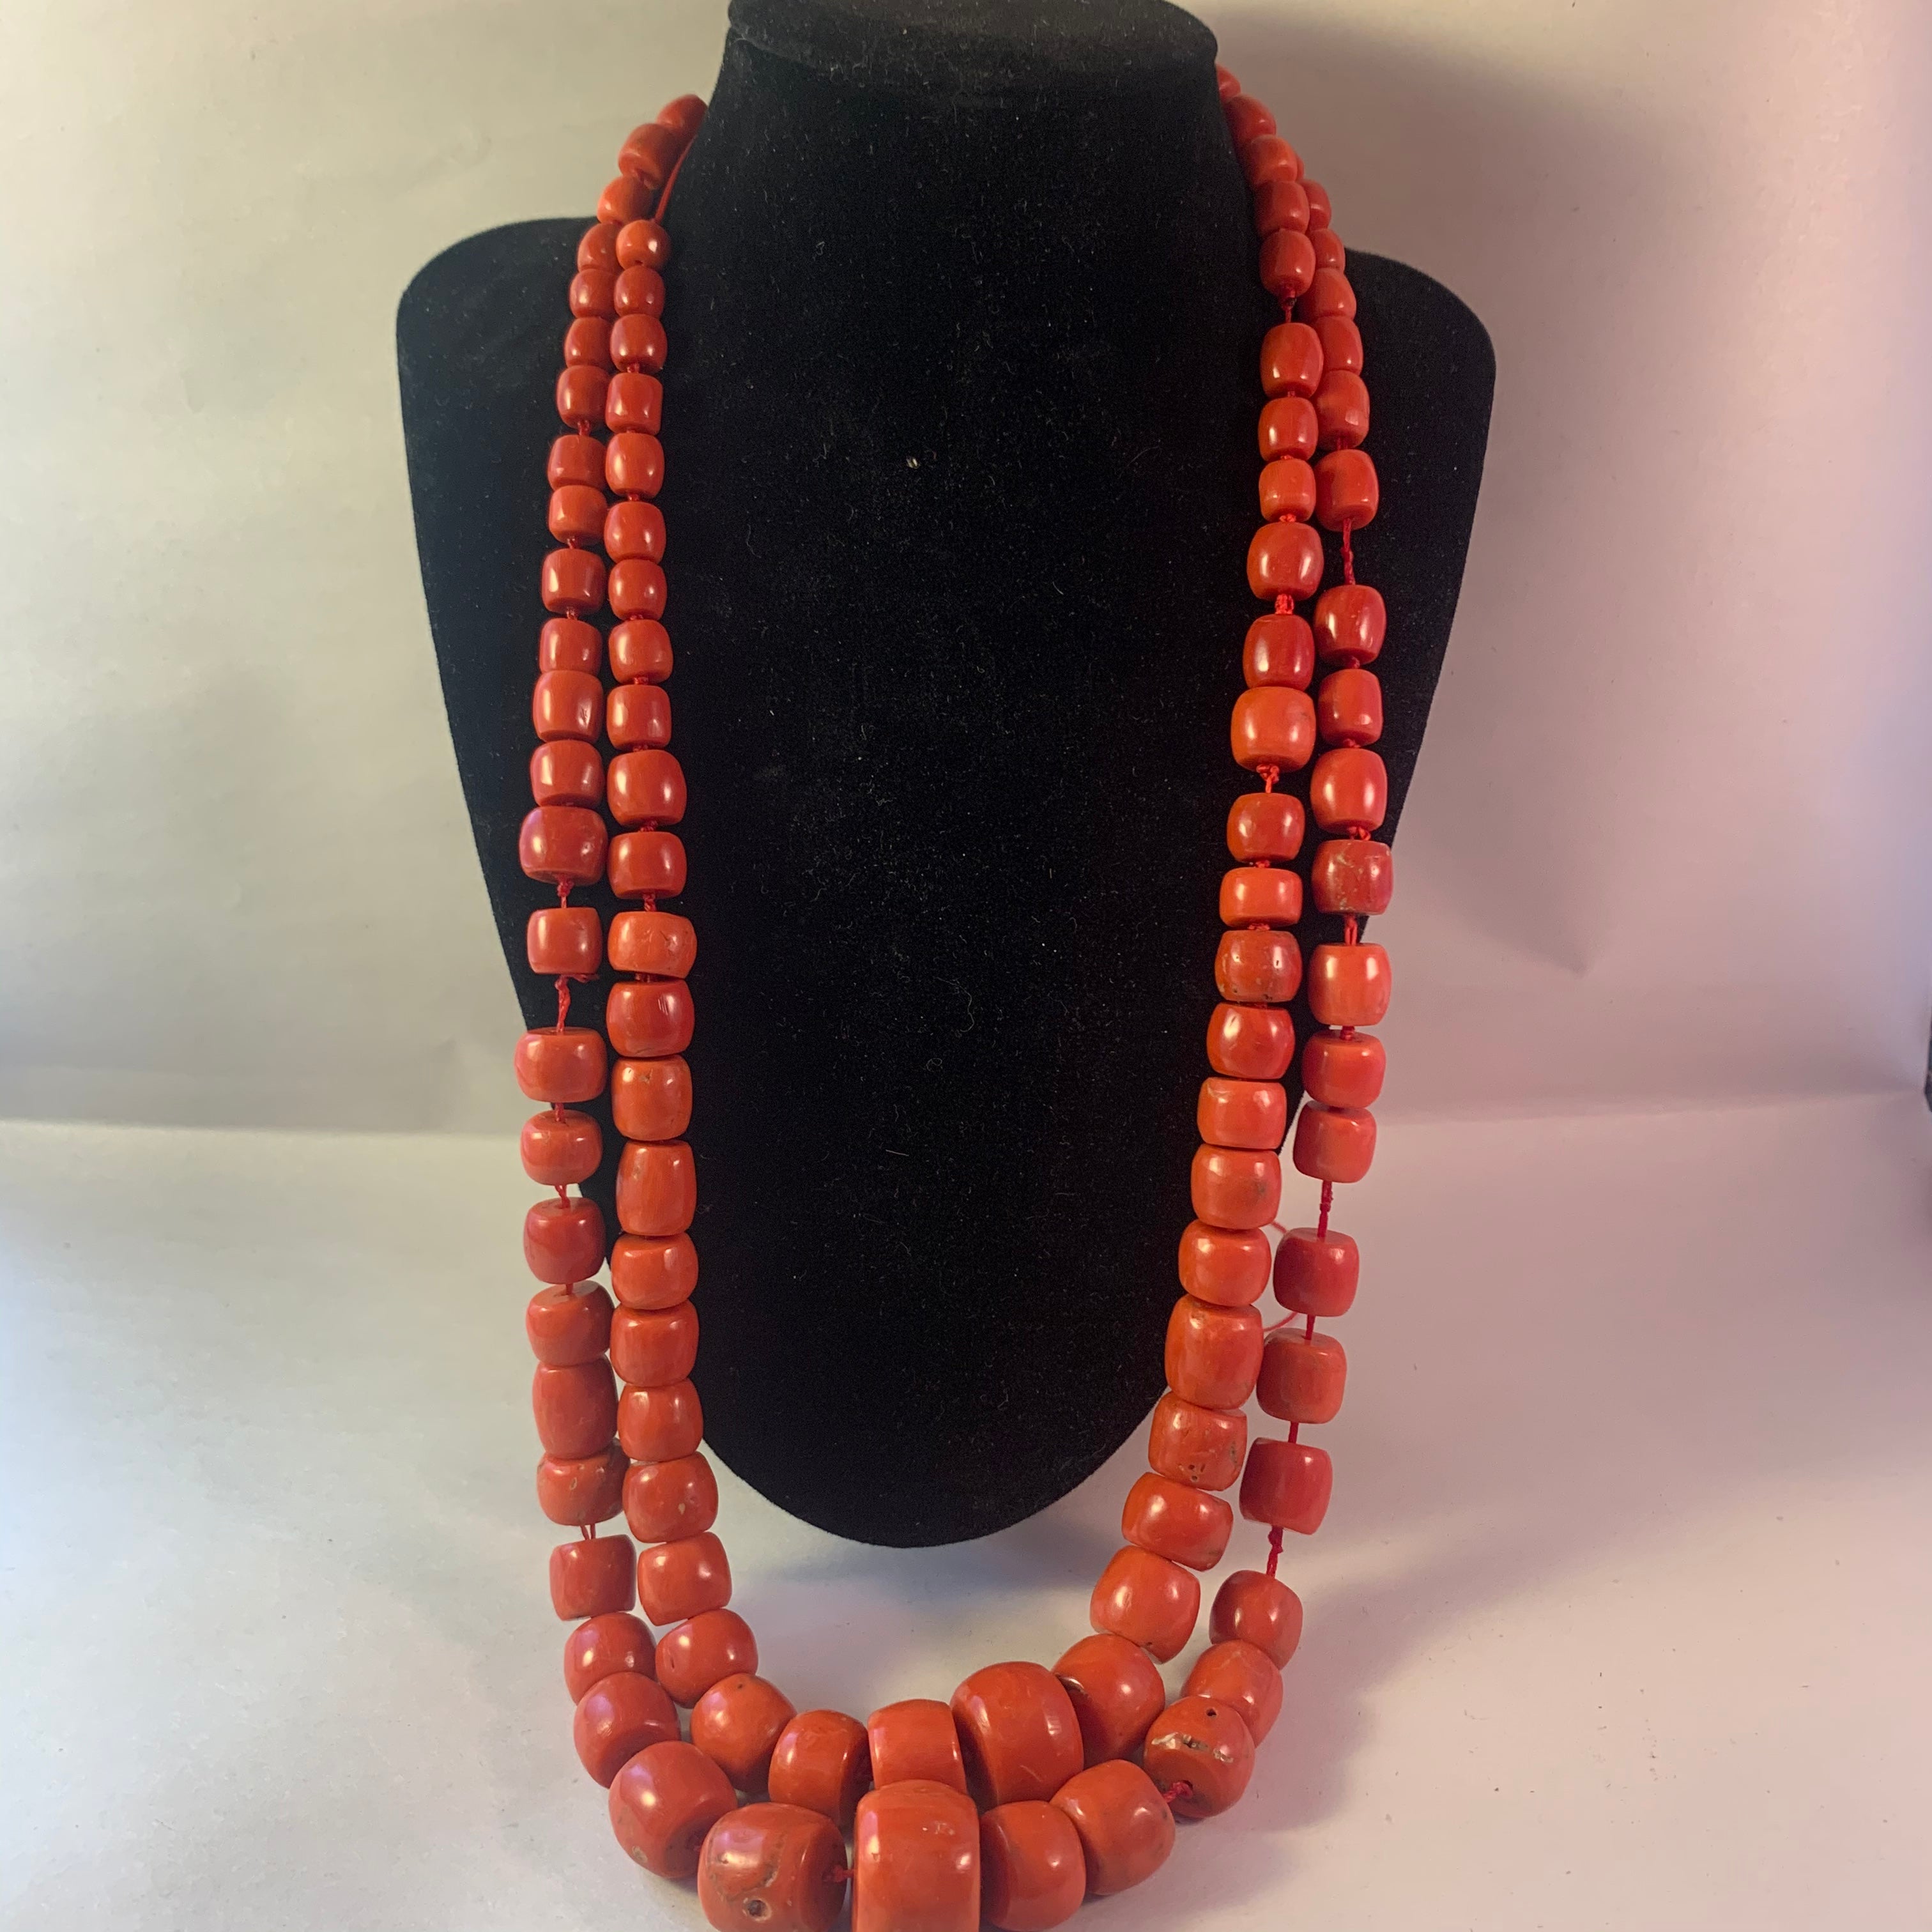 Multistrand Coral Necklace, Orange Coral Beads, Gemstone Necklace, Bright  Coral Jewellery, 3 Rows Coral Necklace, Ukrainian Style - Etsy | Coral  jewelry vintage, Diy jewelry necklace, Pearl jewelry design